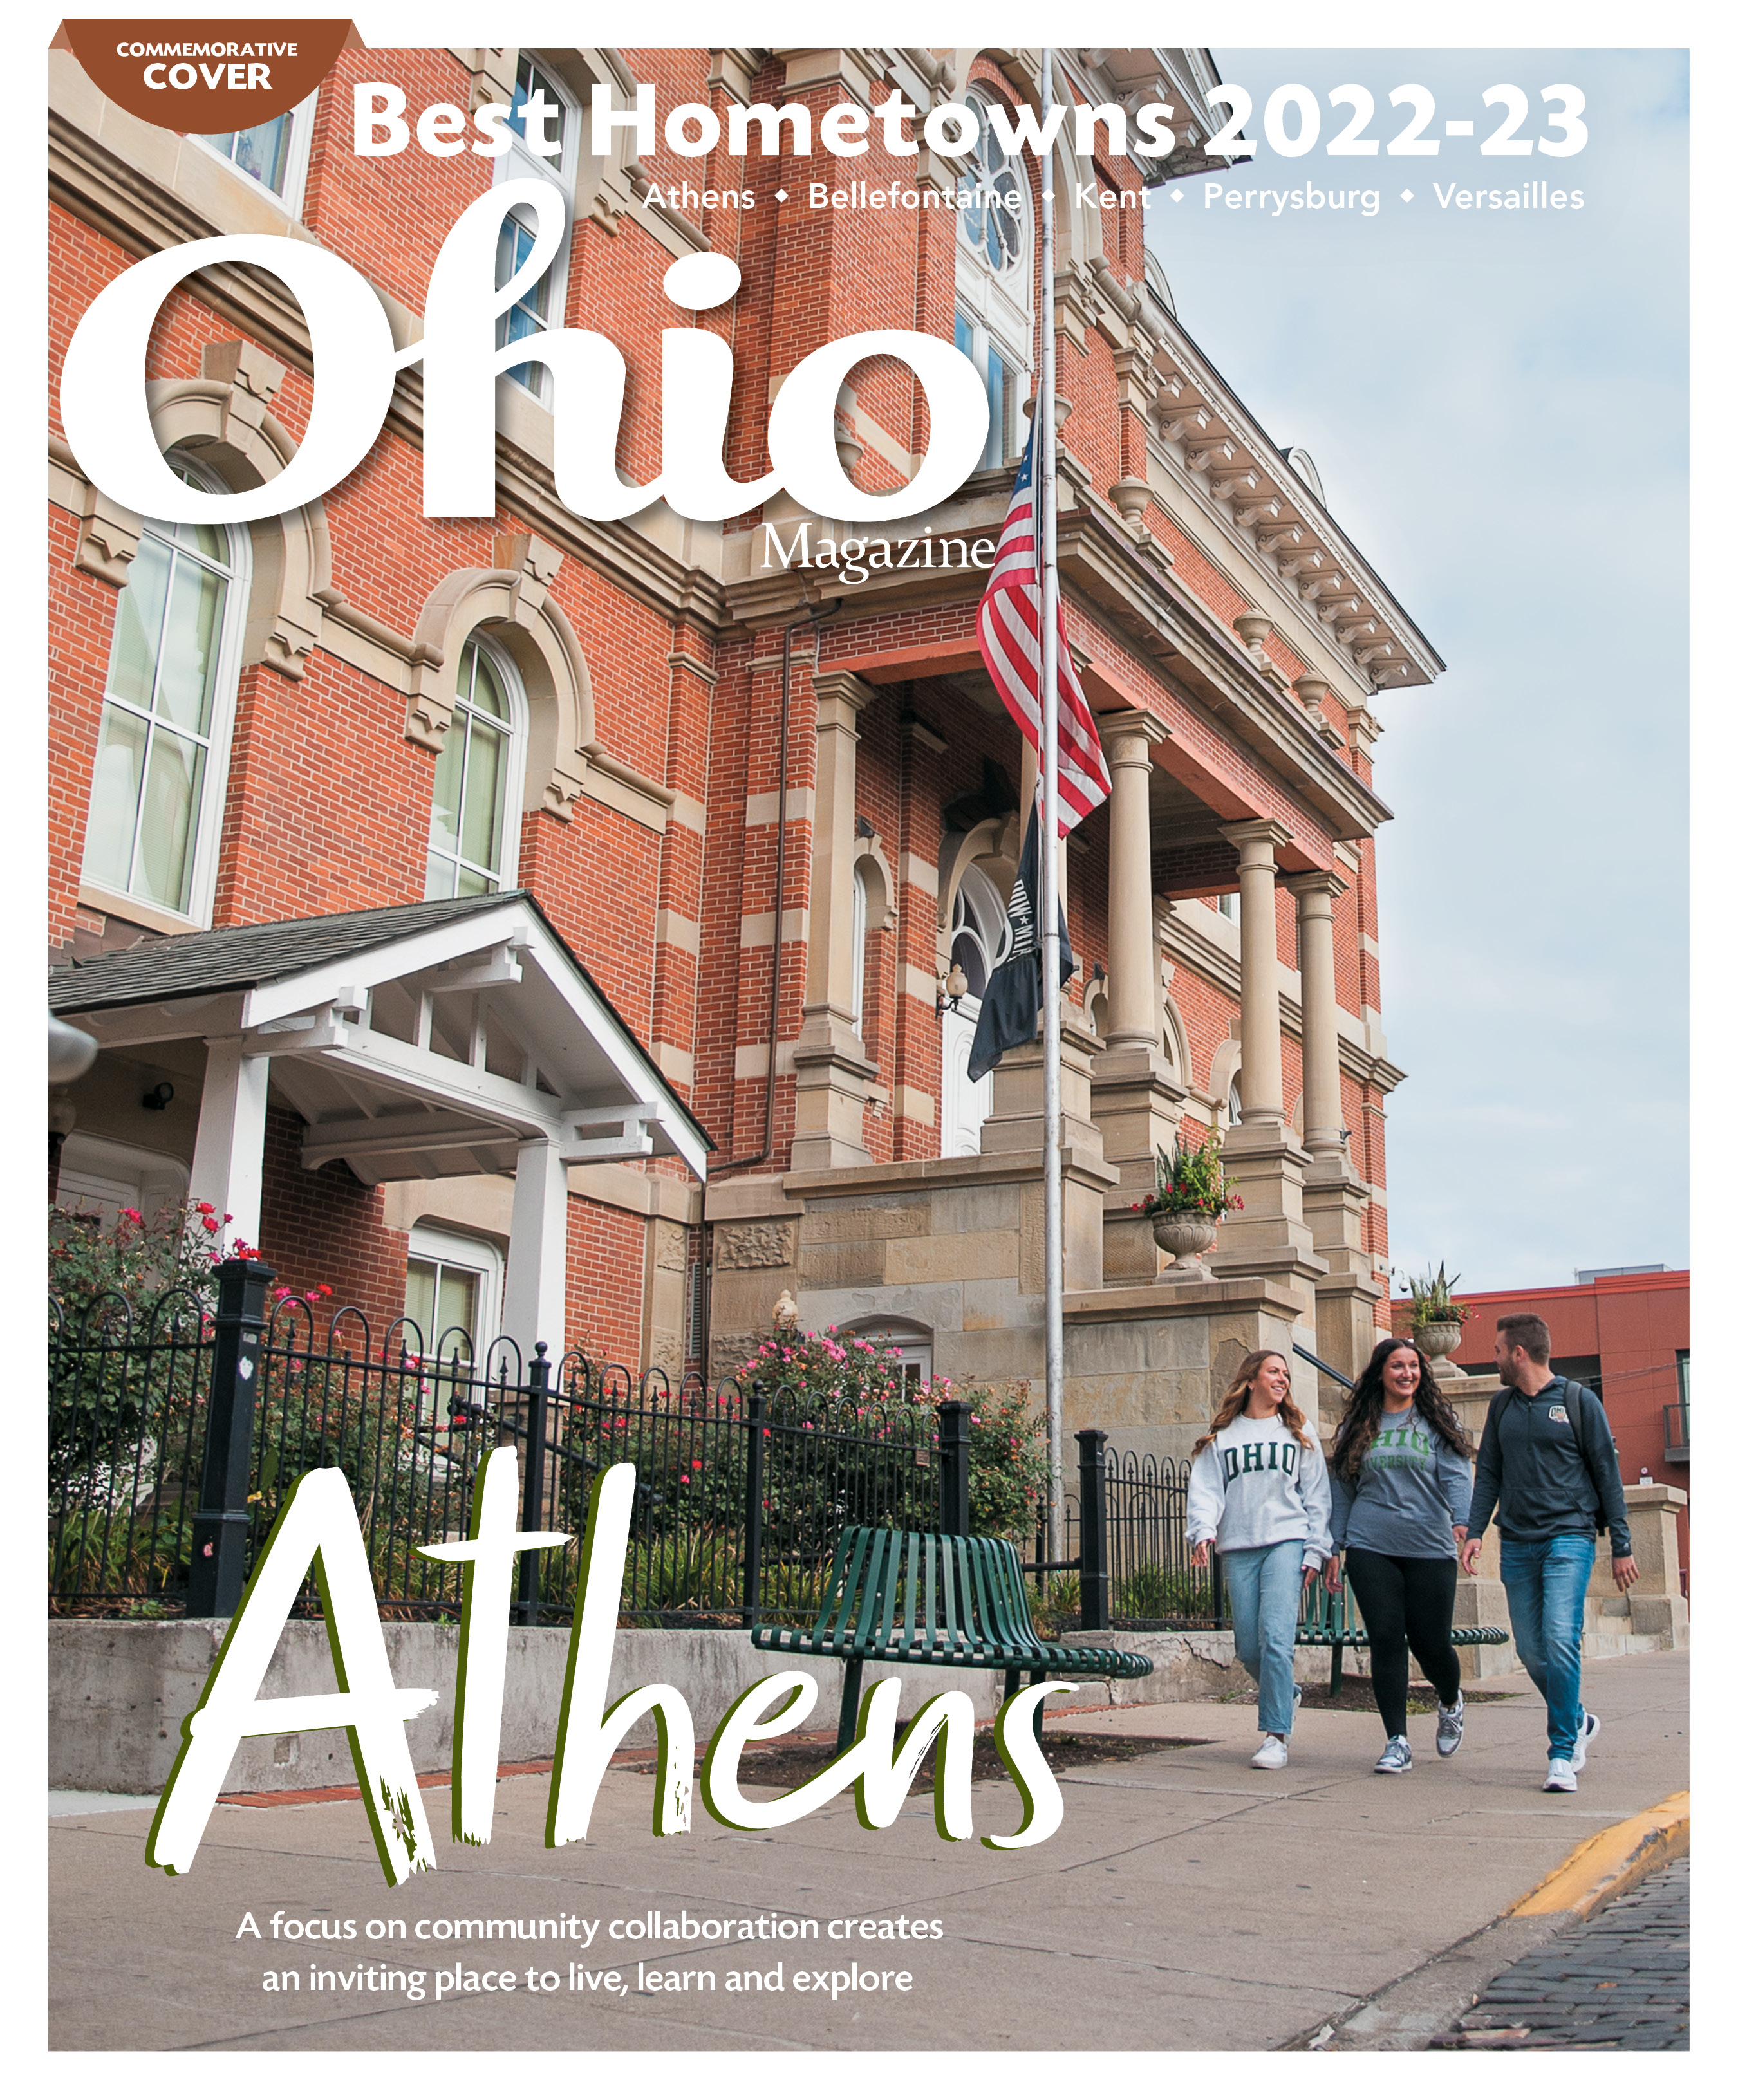 Athens 2022-23 Best Hometowns Cover (photo by Michelle Waters)